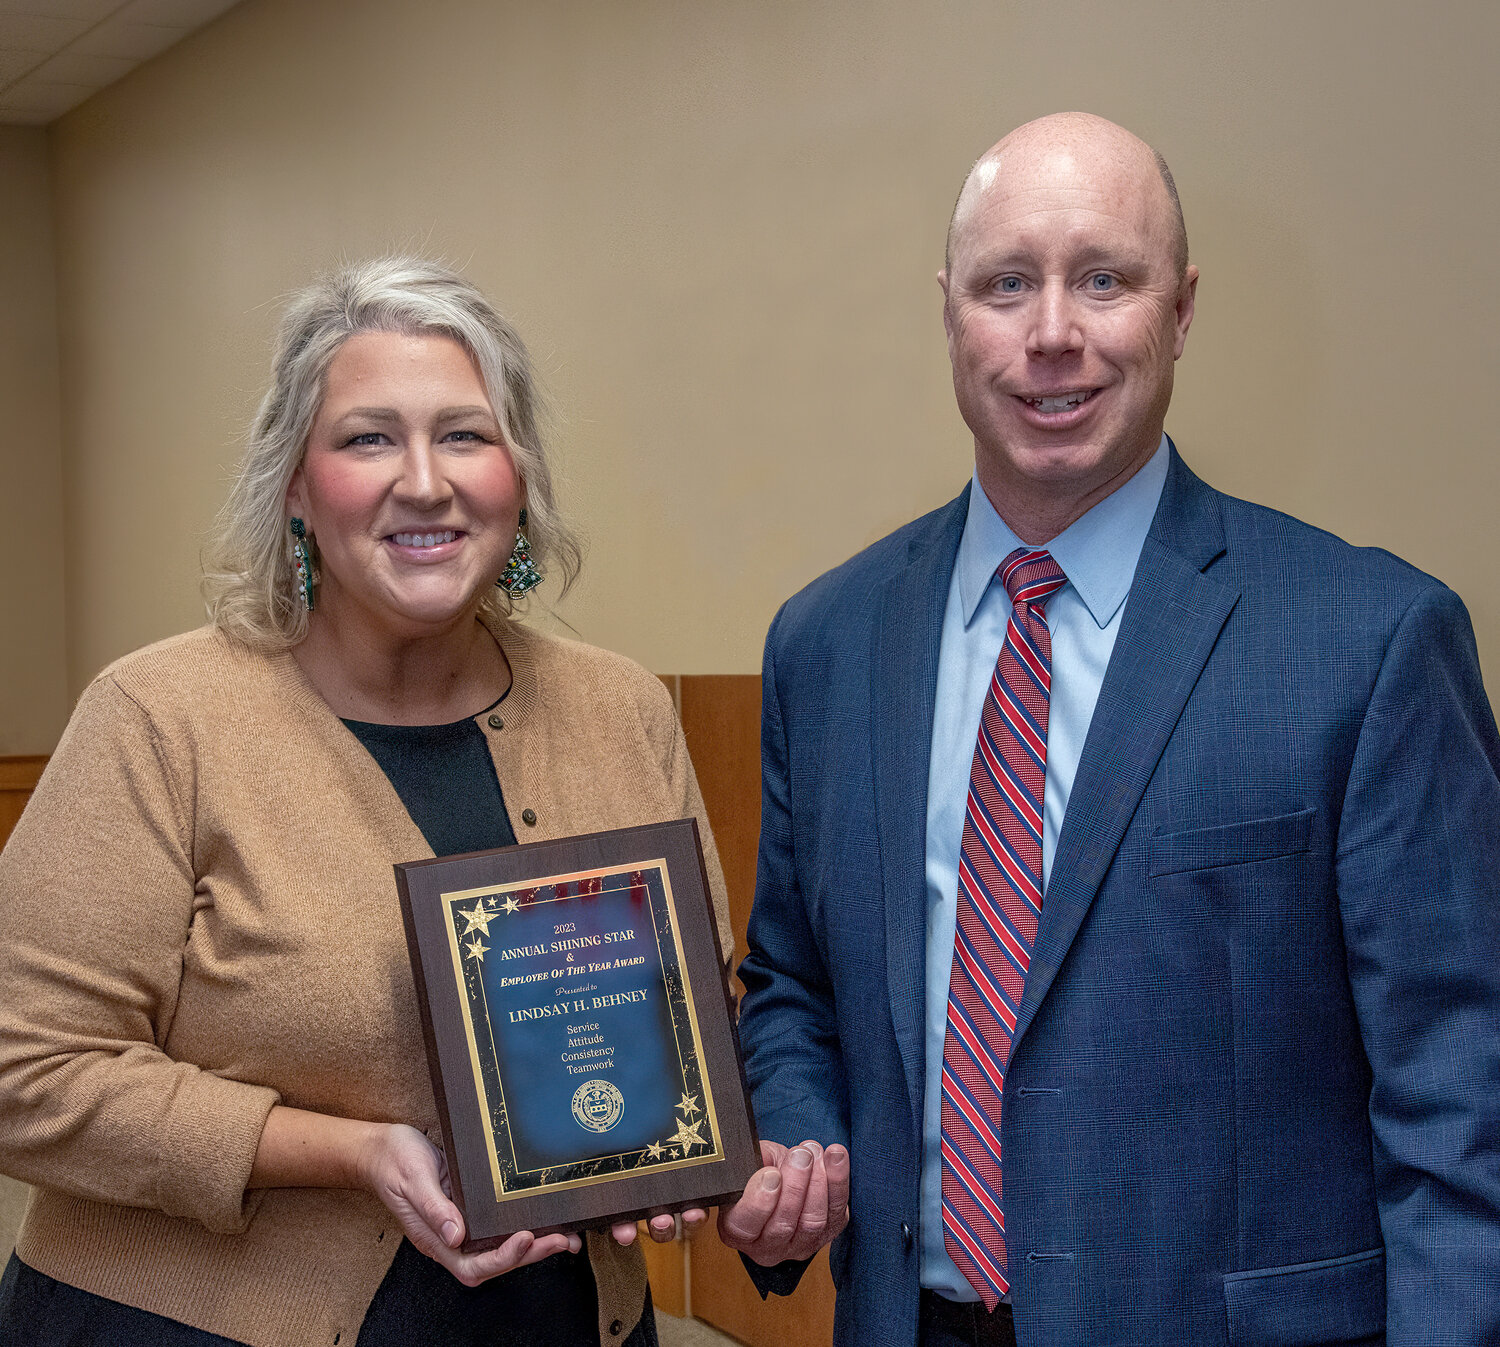 Lindsay Behney, Sussex County's 2023 Employee of the Year, stands with county administrator Todd Lawson.